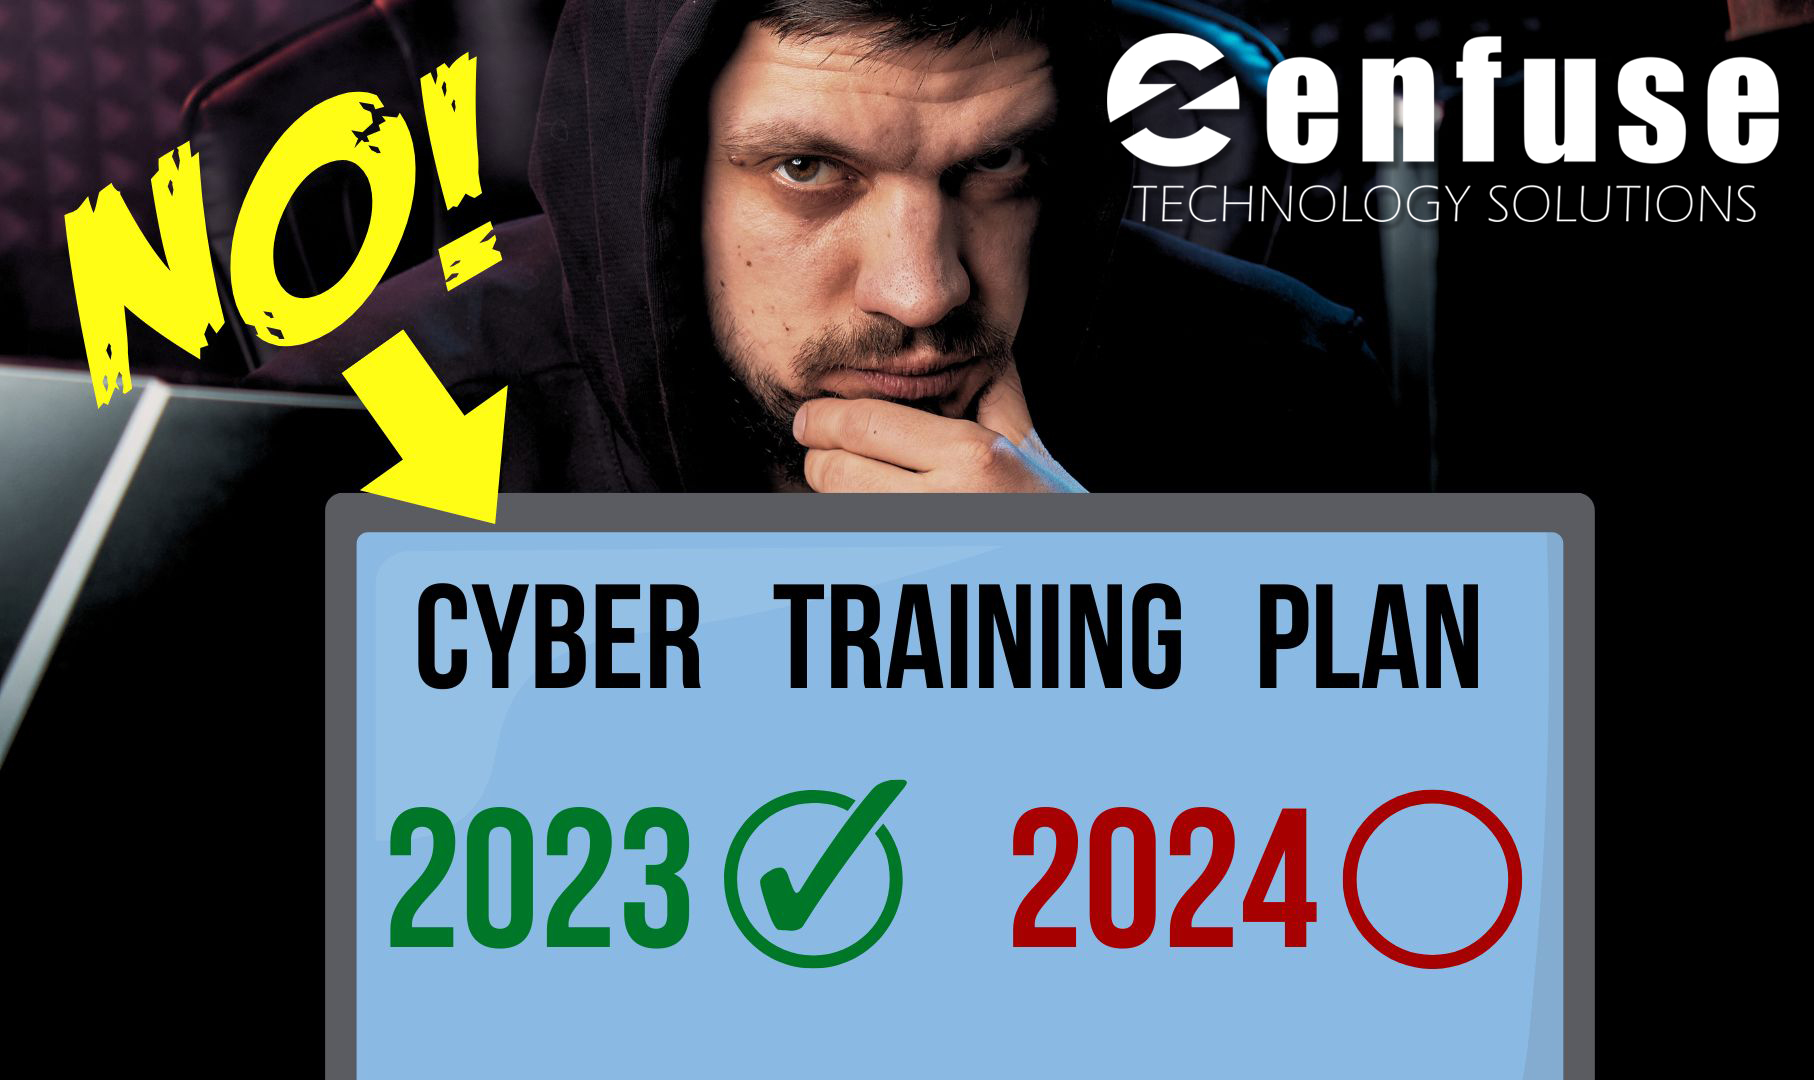 Cyber security training once a year isn’t working